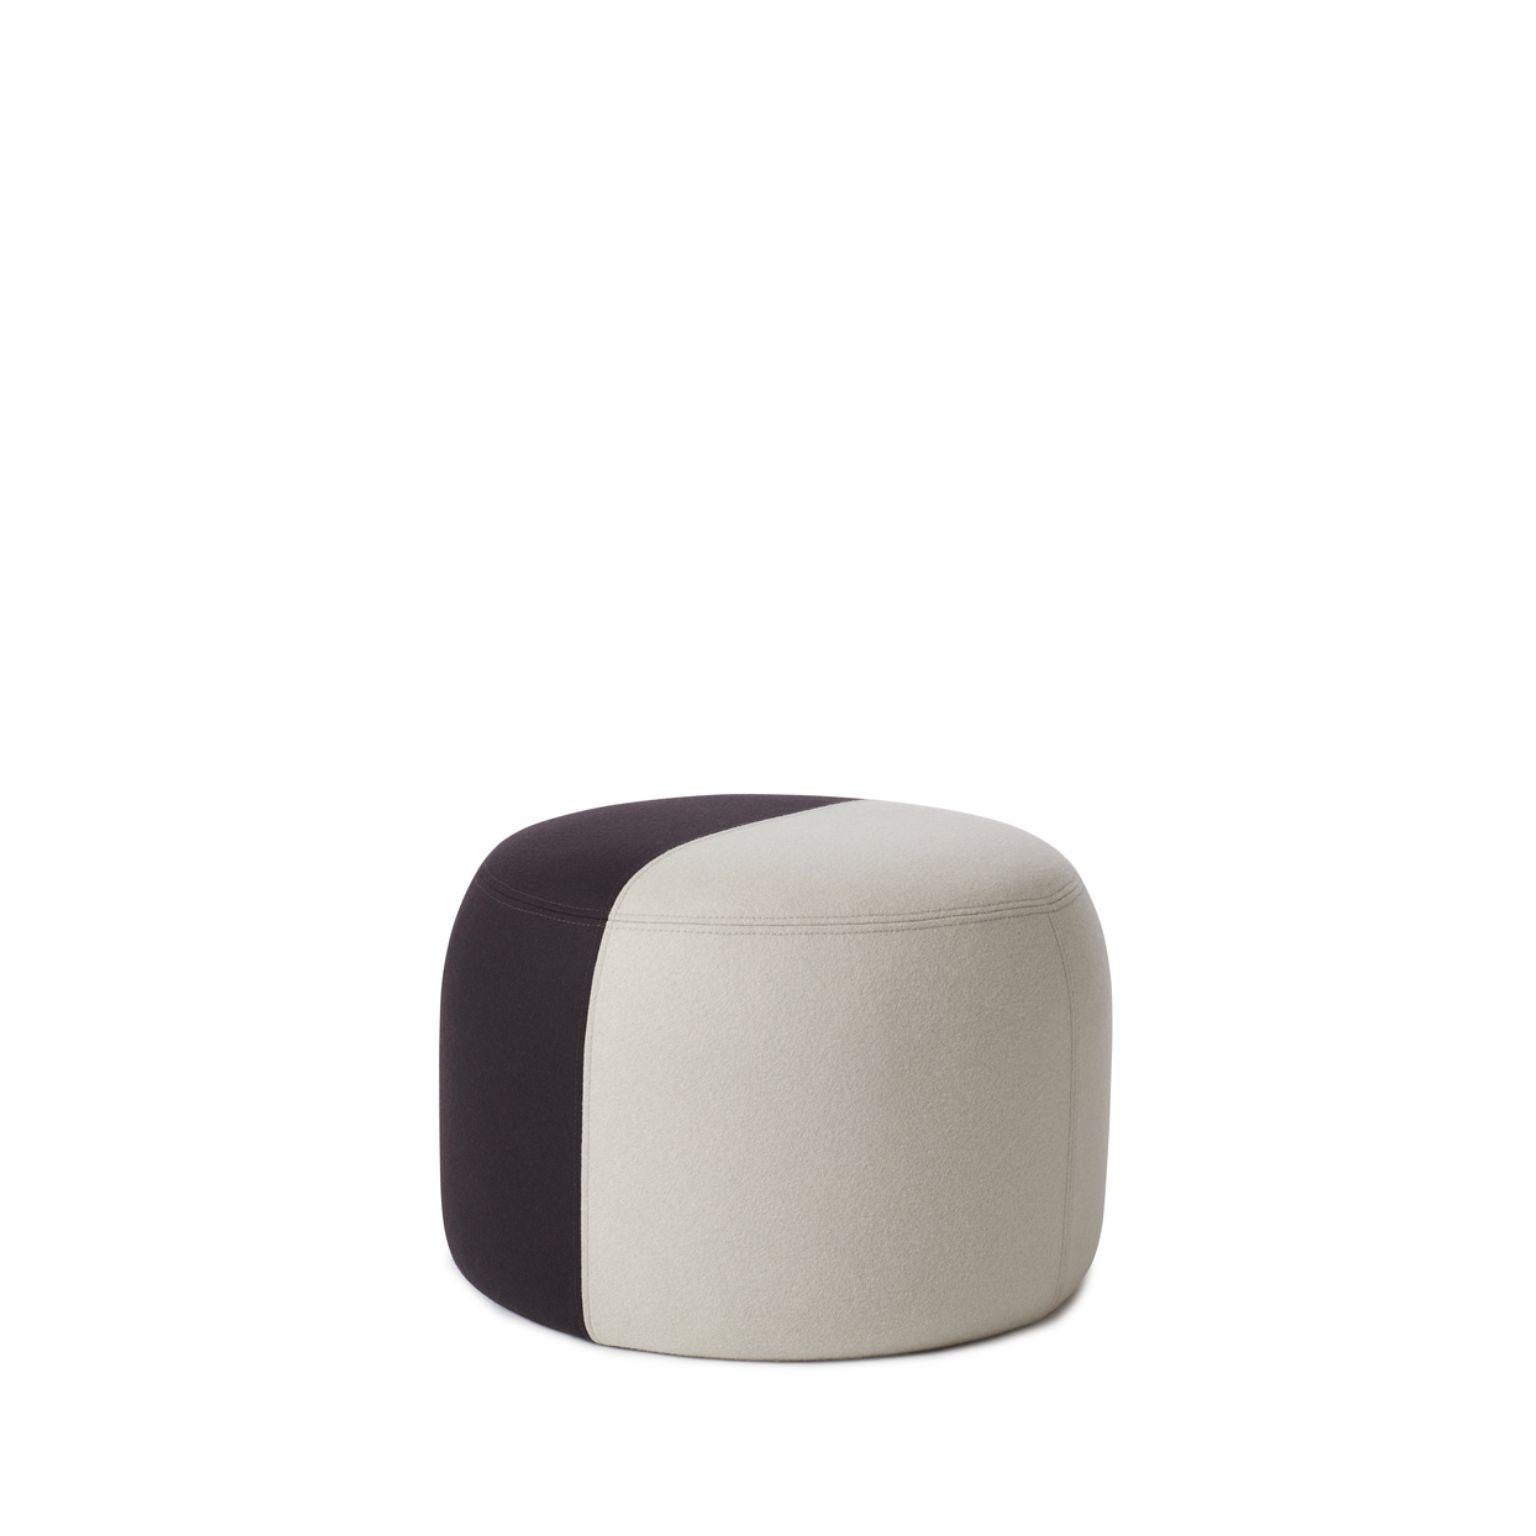 Dainty Pouf Pearl grey black by Warm Nordic
Dimensions: D 55 x H 39 cm
Material: Textile upholstery, Wooden frame, foam.
Weight: 9.5 kg
Also available in different colours and finishes.

Sophisticated, two-coloured pouf with soft shapes and a clean